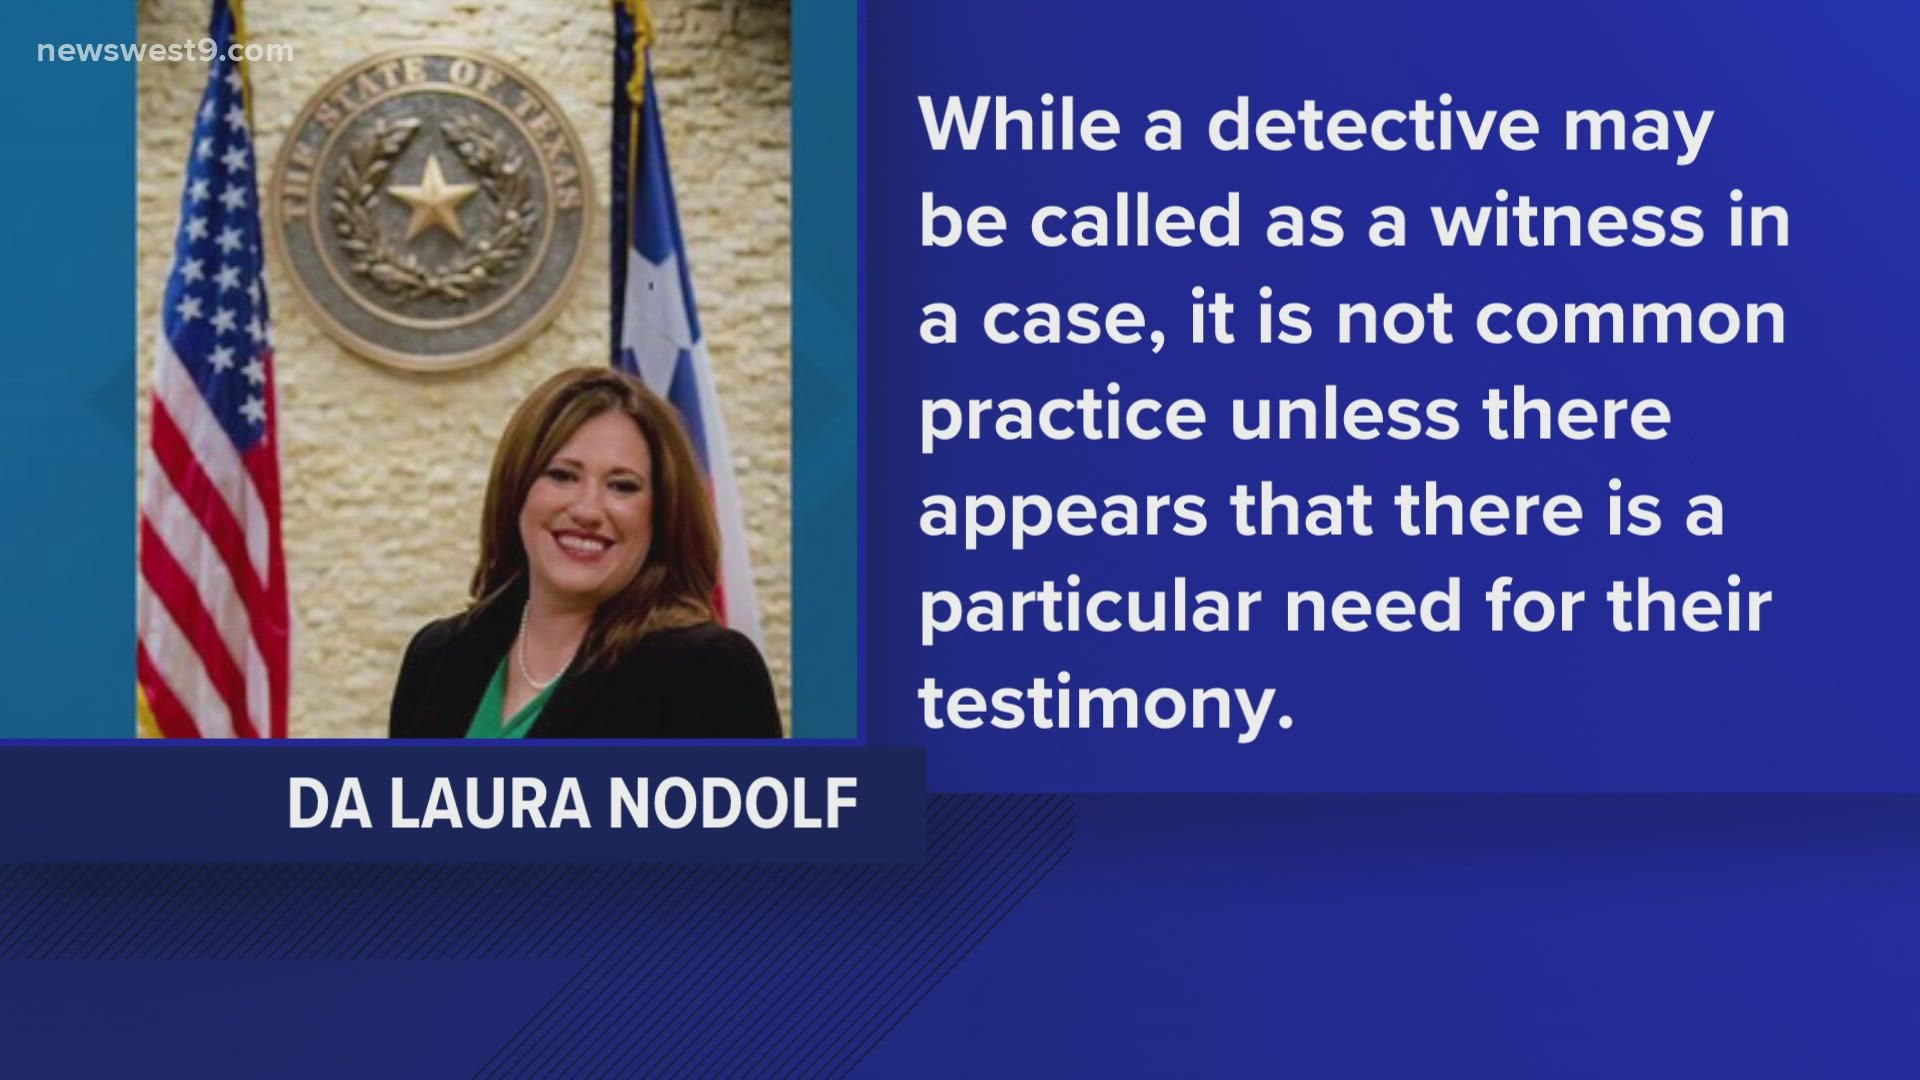 "While a detective may be called as a witness in a case, it is not common practice unless there appears that there is a particular need for their testimony."